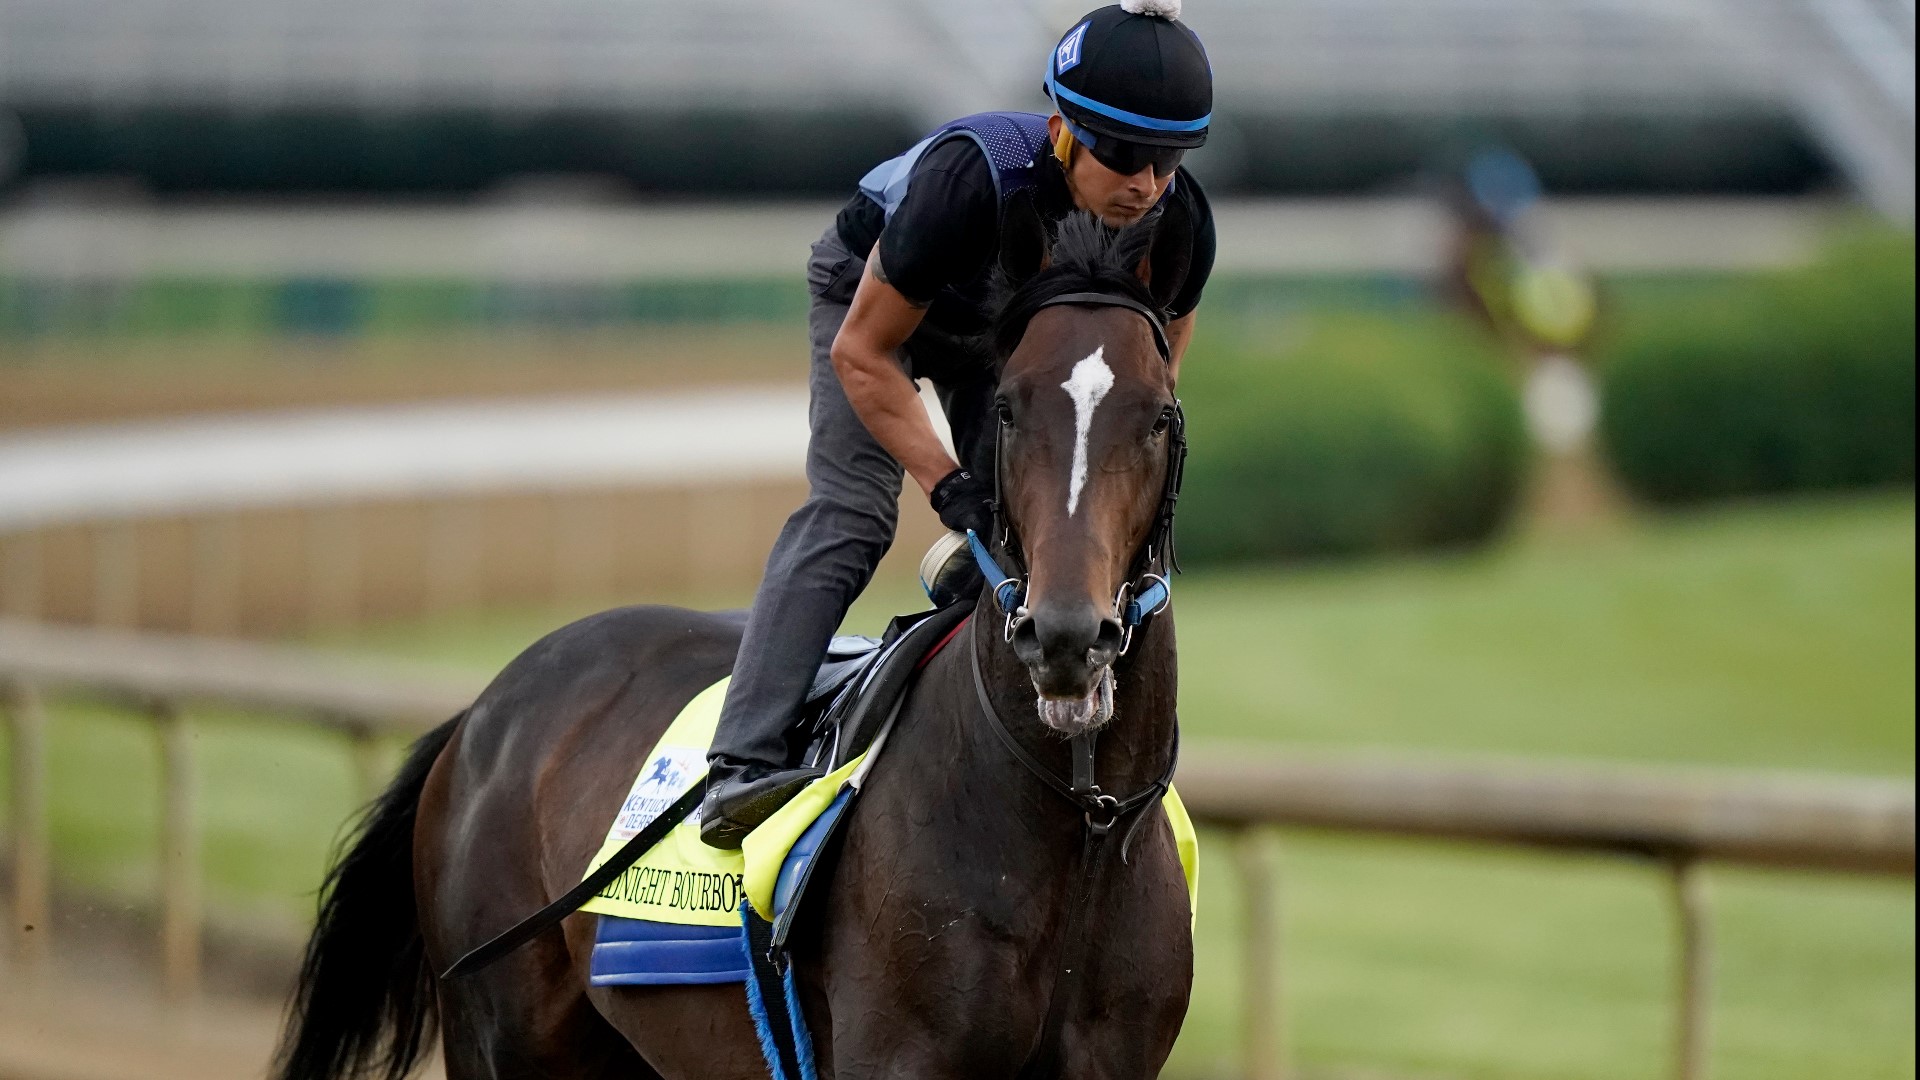 Steve Asmussen is the all-time leading trainer at Churchill Downs and is seeking his first Derby win with his two thoroughbreds.